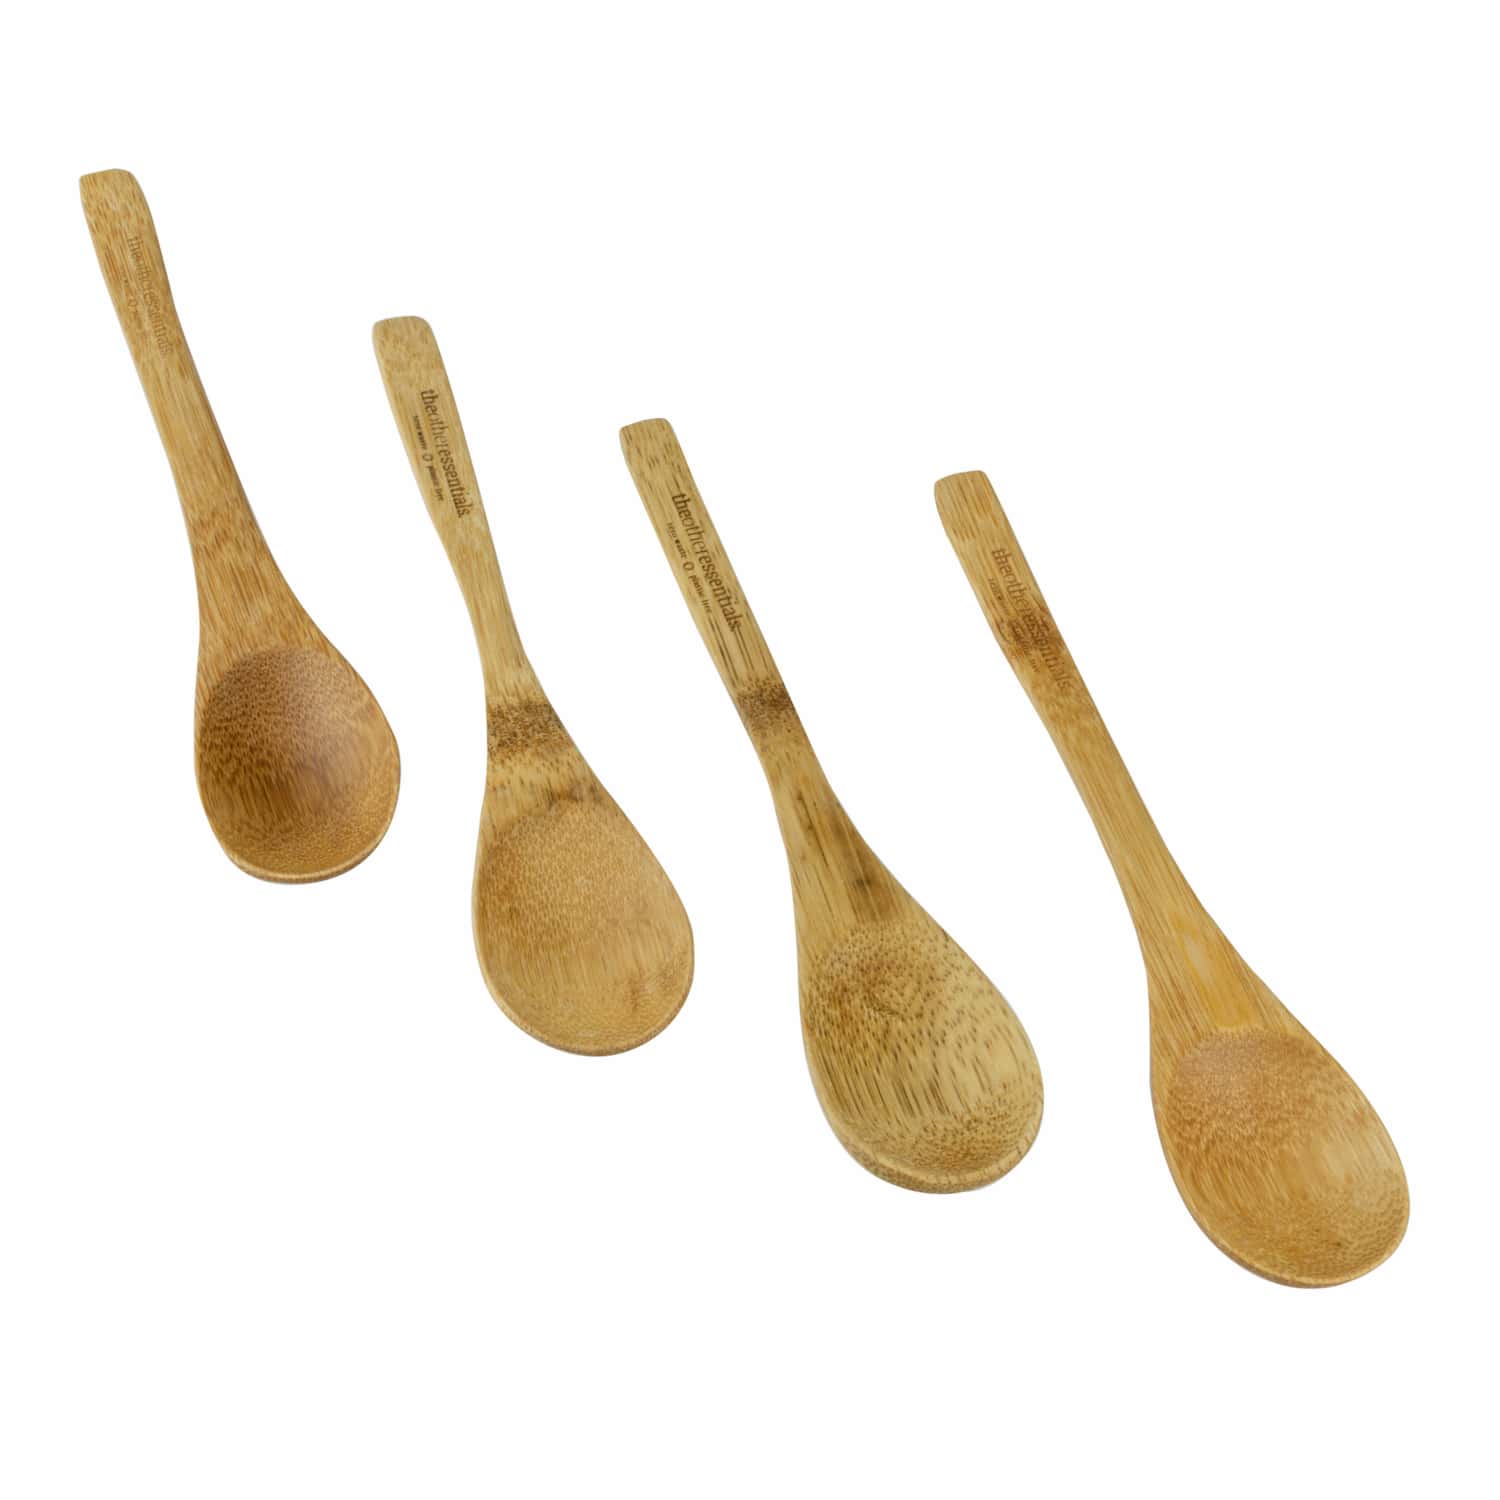 four bamboo spoons